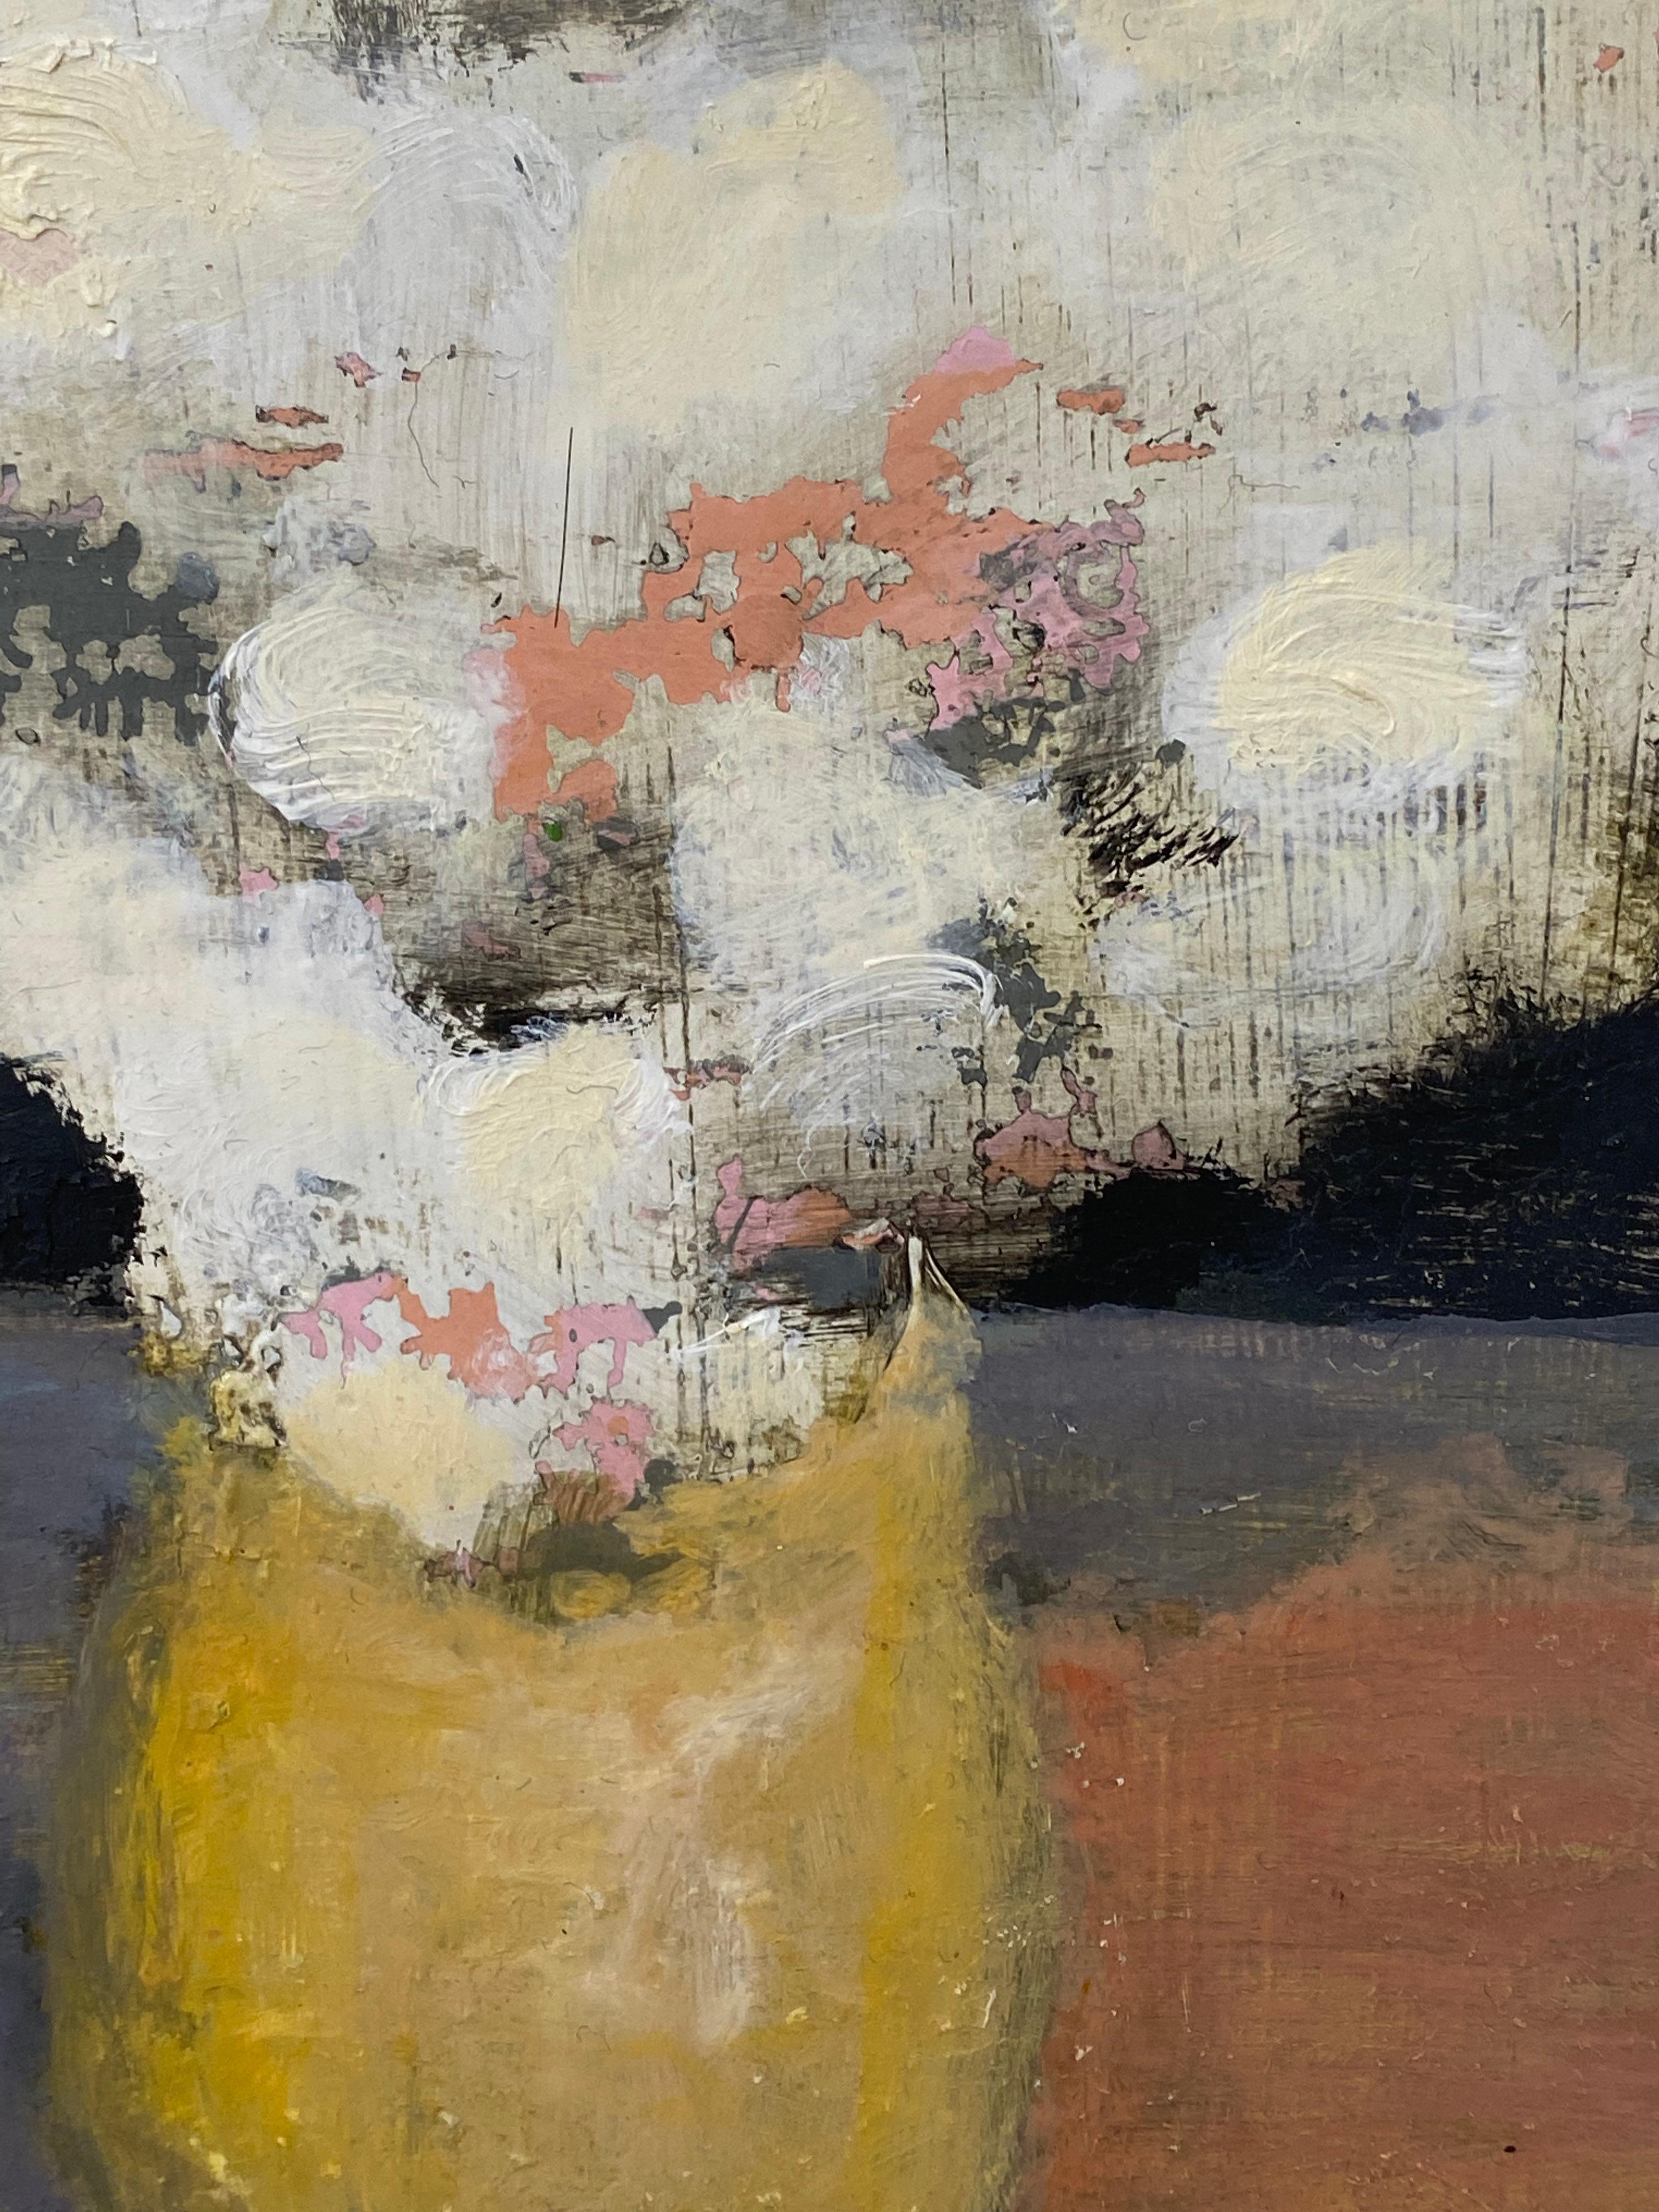 A yellow vase holds an arrangement of white blossoms. The color of the bouquet complements the dark background and the coral colored table in this intimate still life painting. Signed, dated and titled on verso.

David Konigsberg bridges the divide